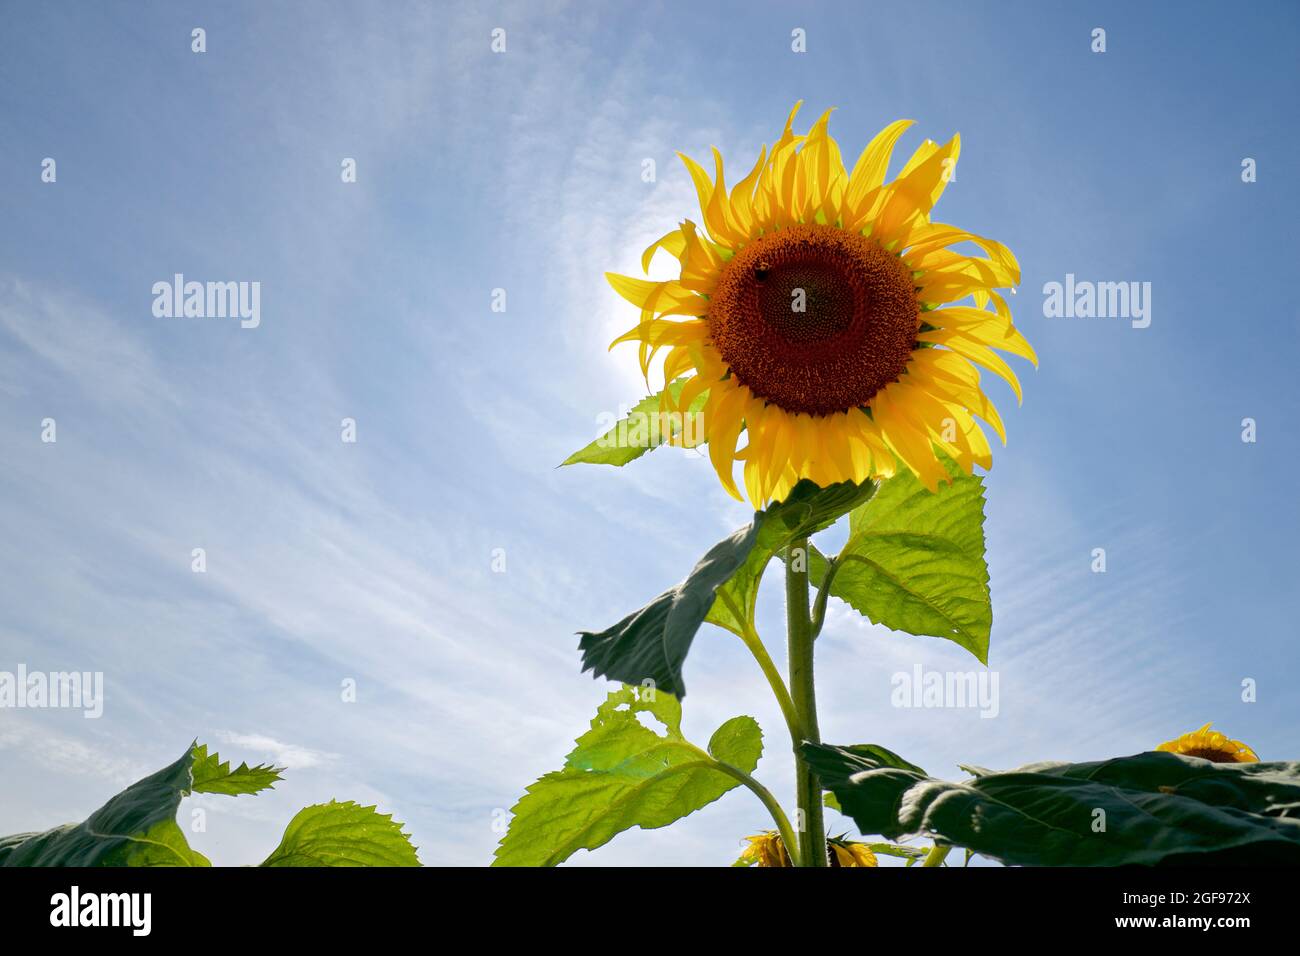 Close-up of a single sunflower with blue sky background Stock Photo